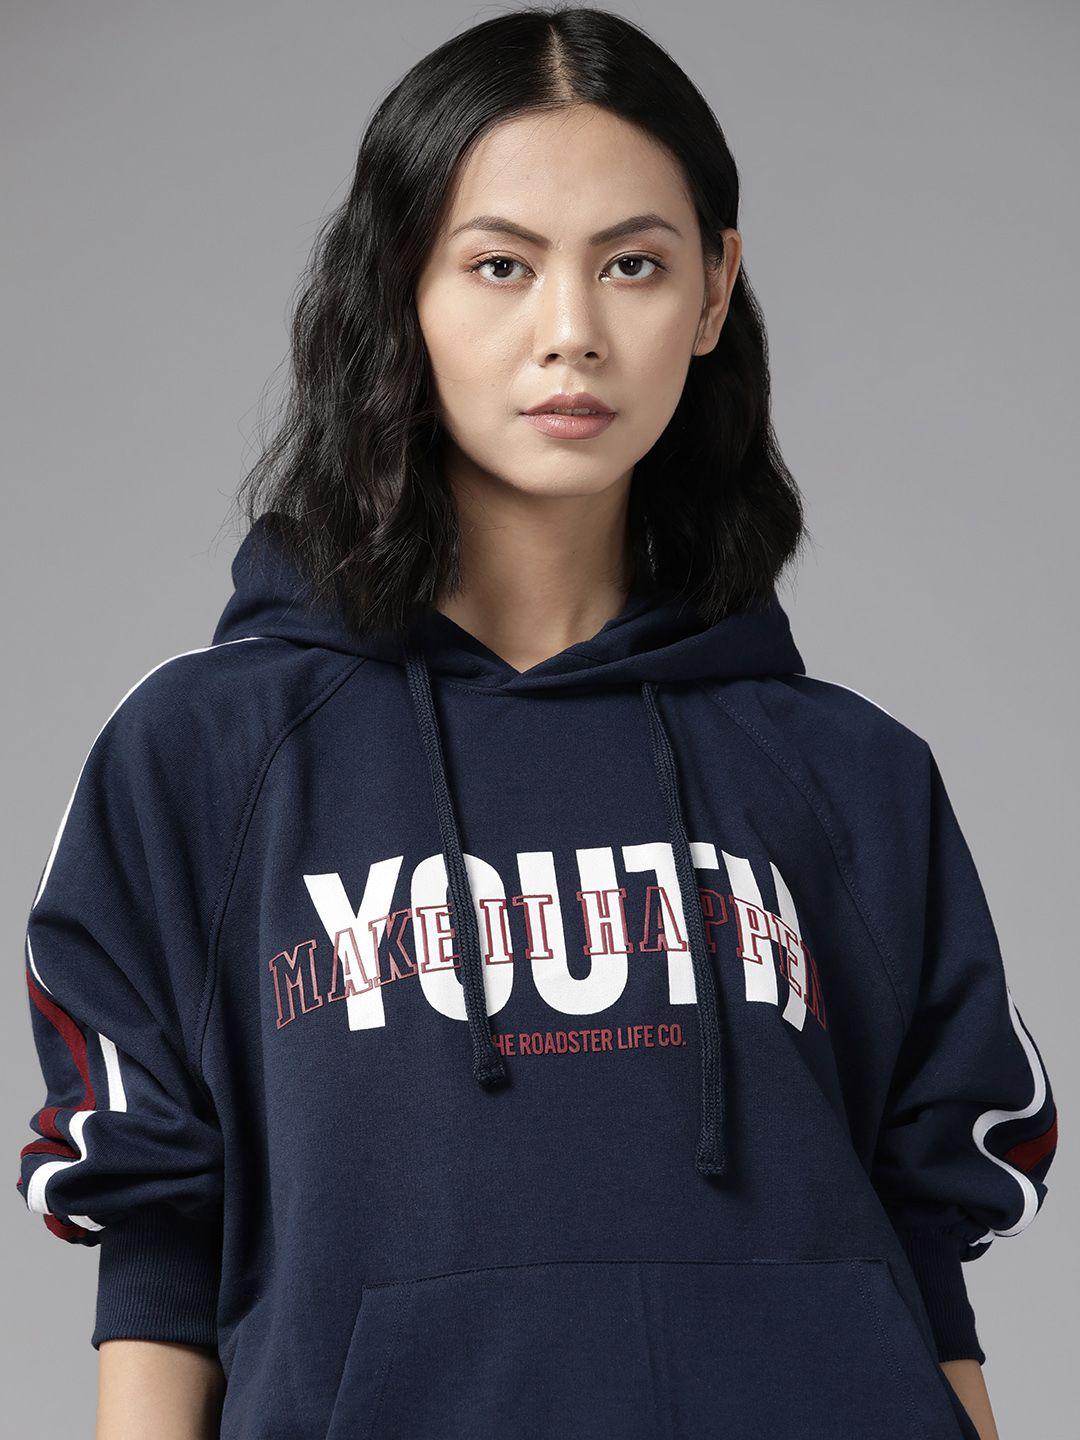 the-roadster-lifestyle-co.-women-navy-blue-typography-printed-hooded-sweatshirt